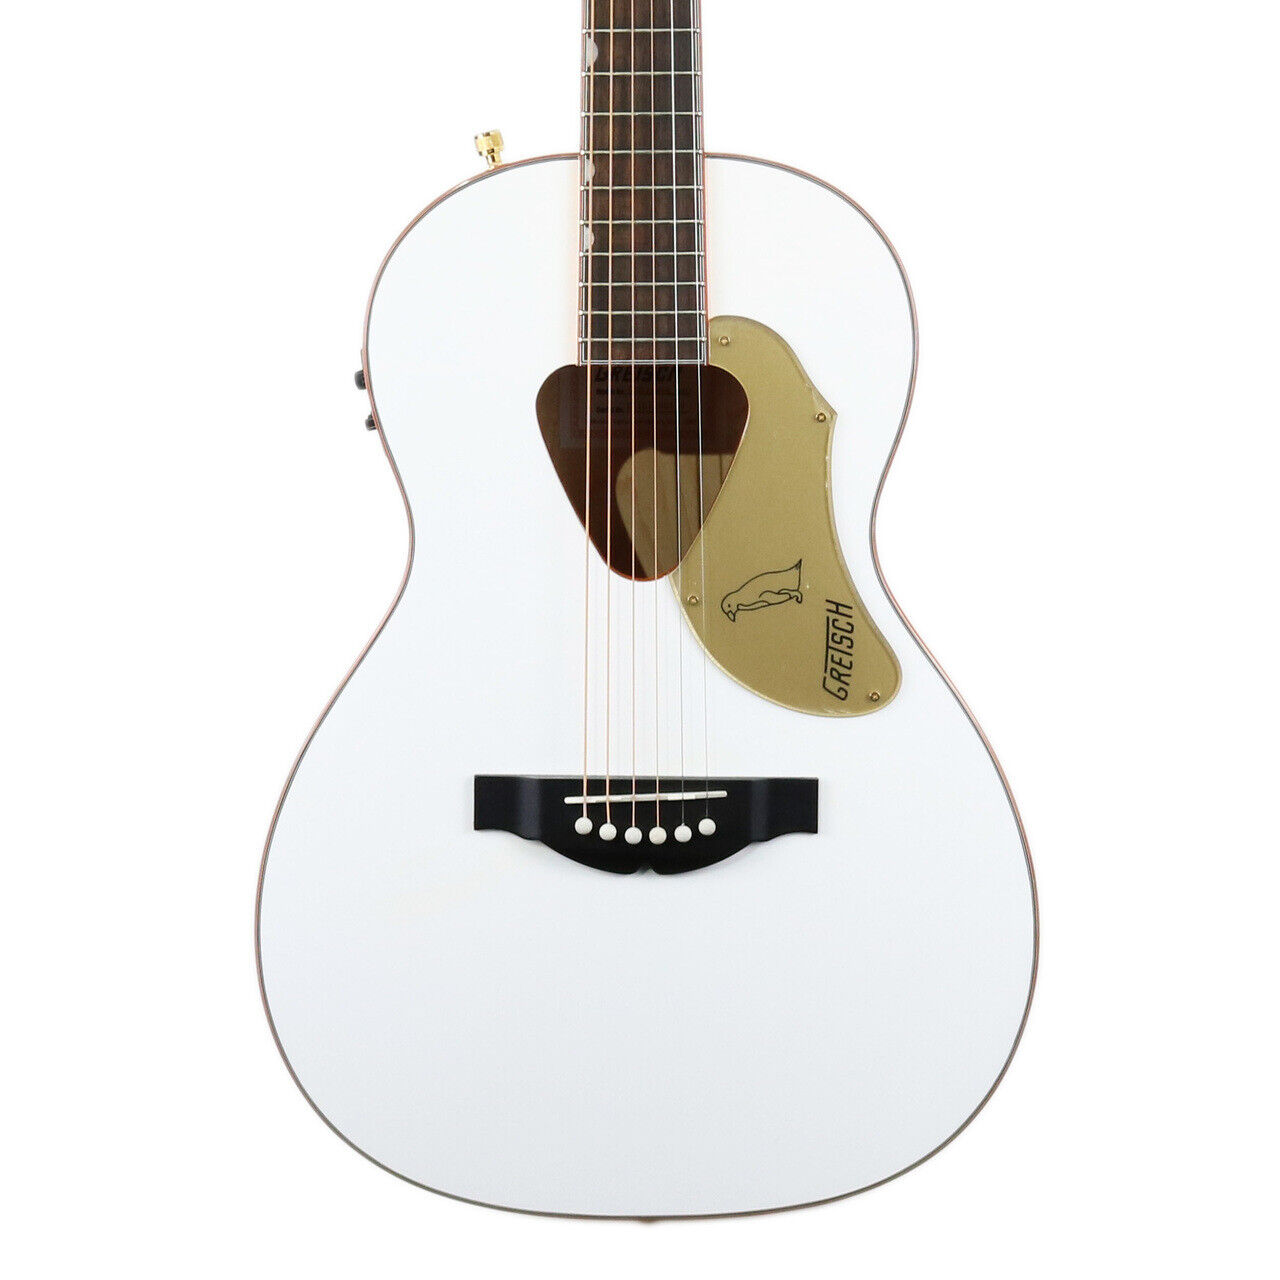 Gretsch G5021WPE Rancher Penguin Parlor Acoustic/Electric Guitar - White  for sale online | eBay